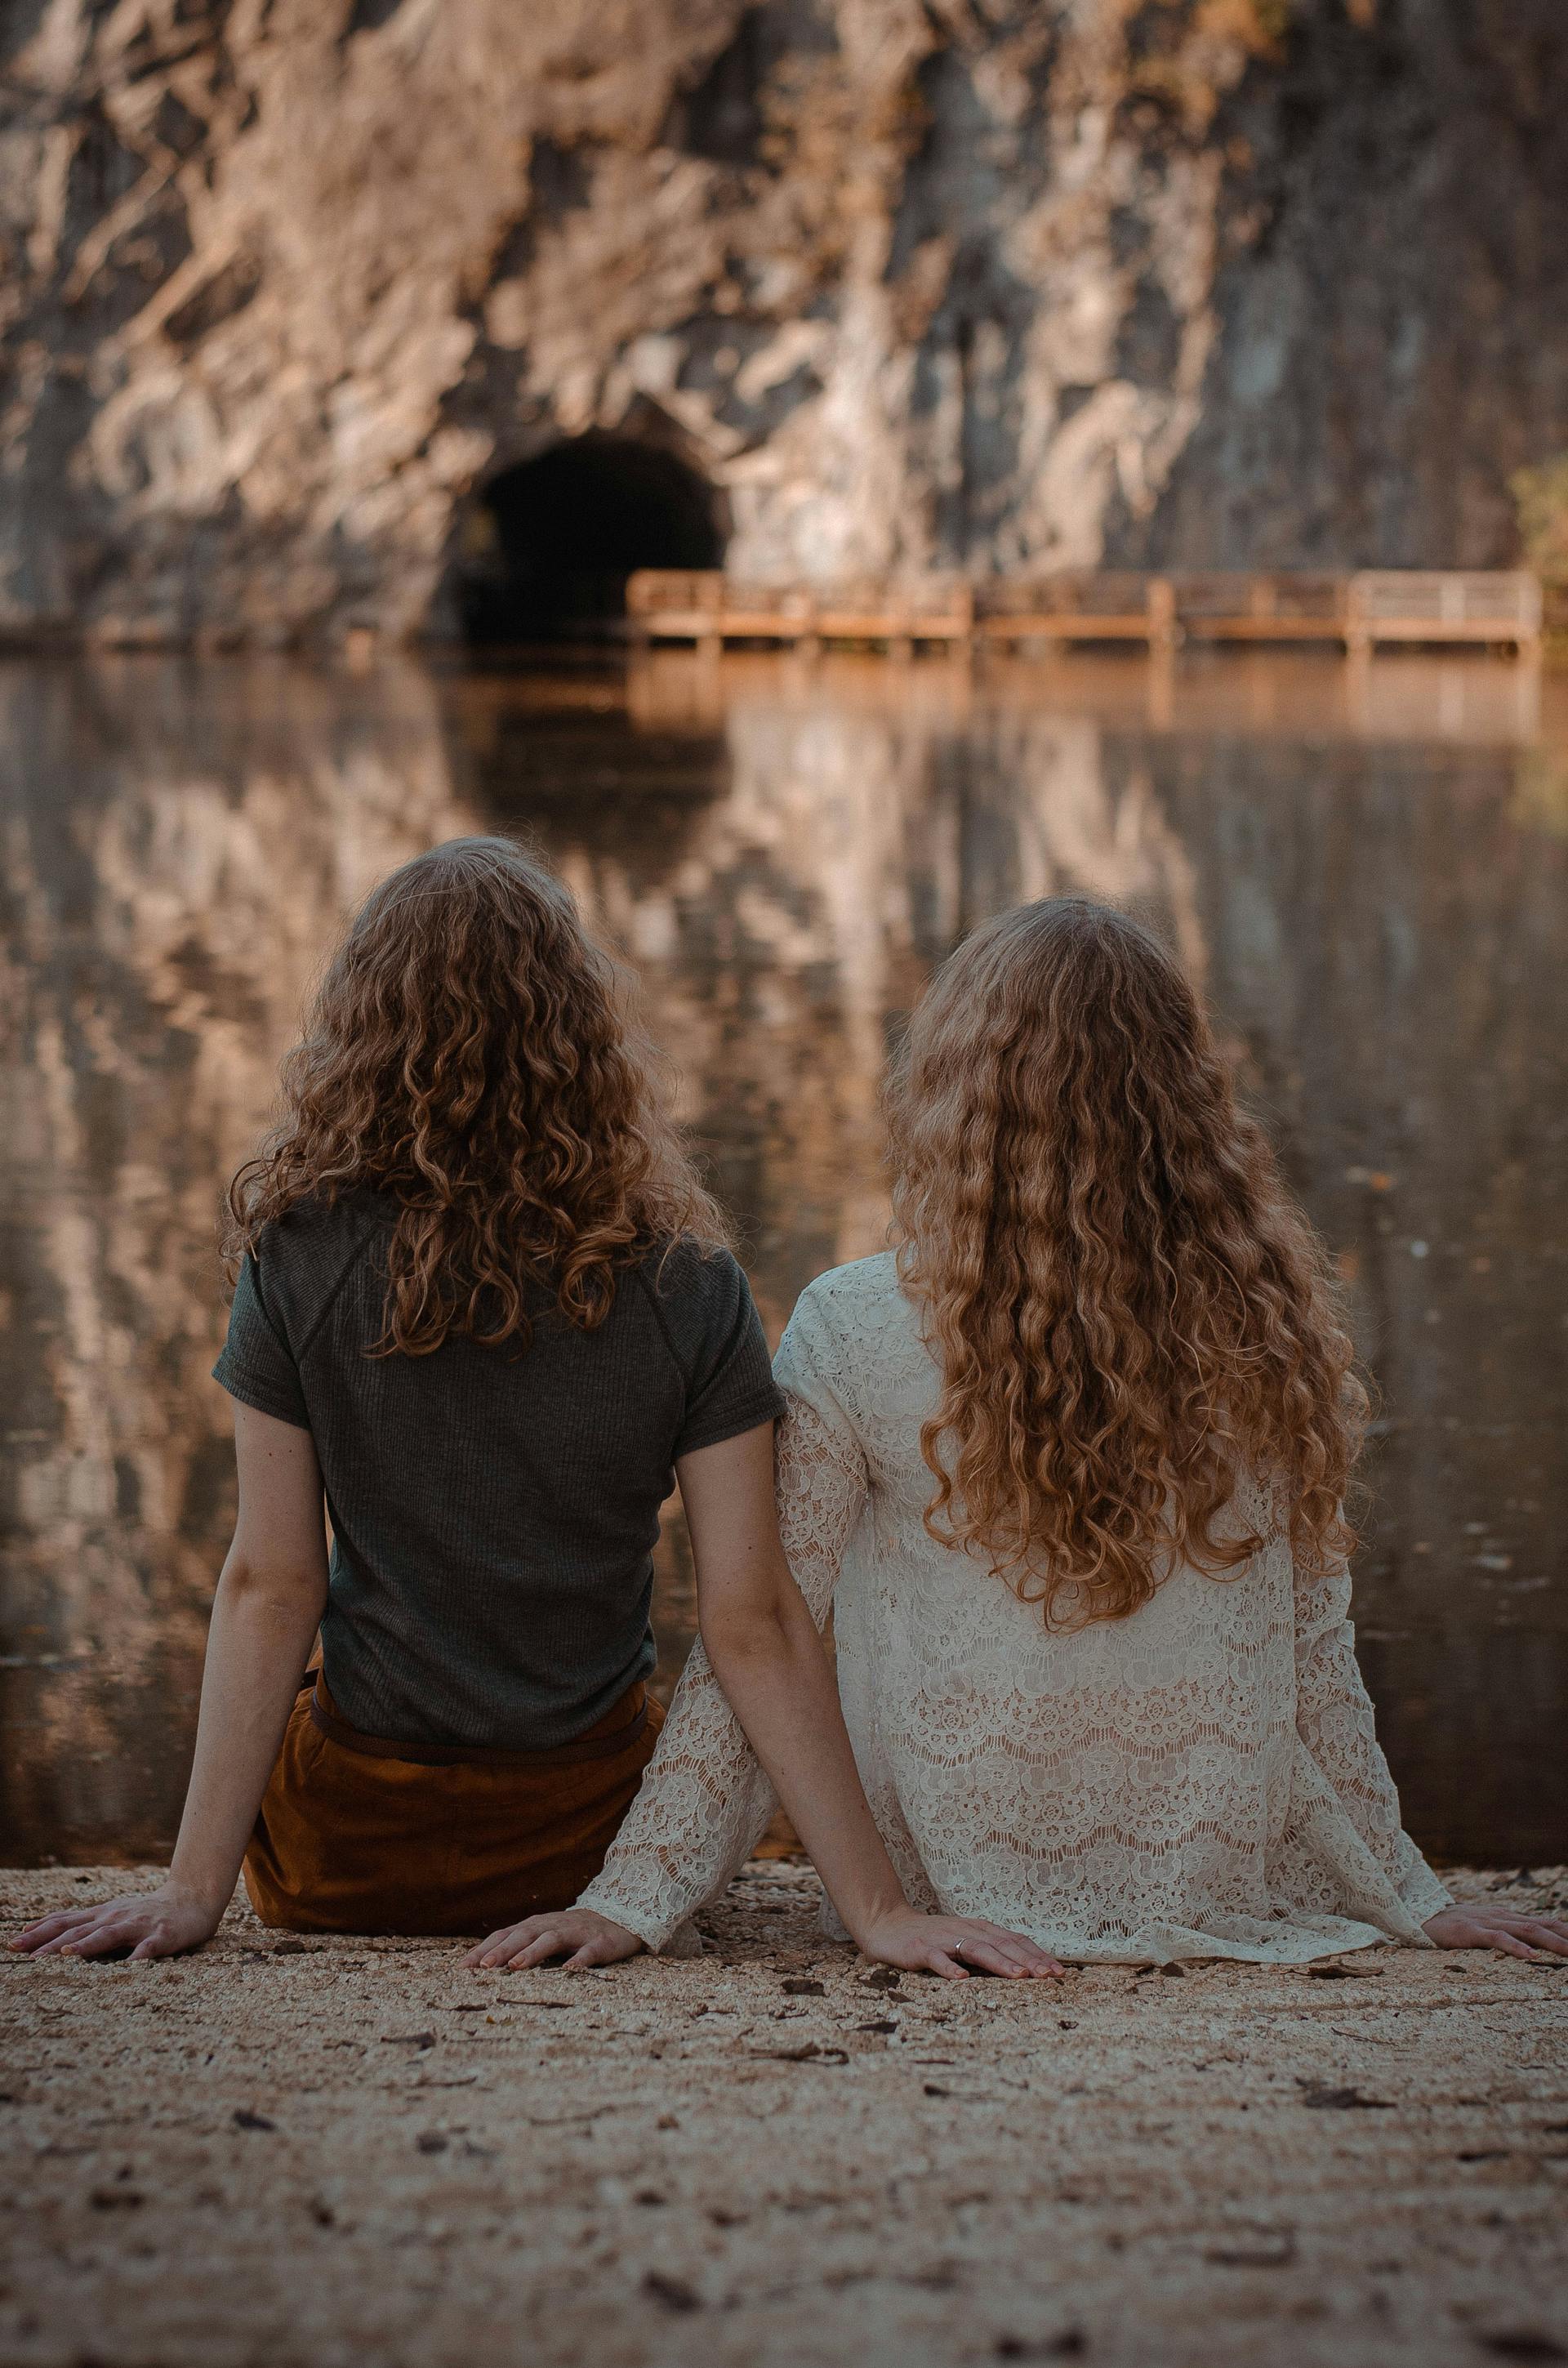 Two women sitting on the ground facing a water body | Source: Pexels